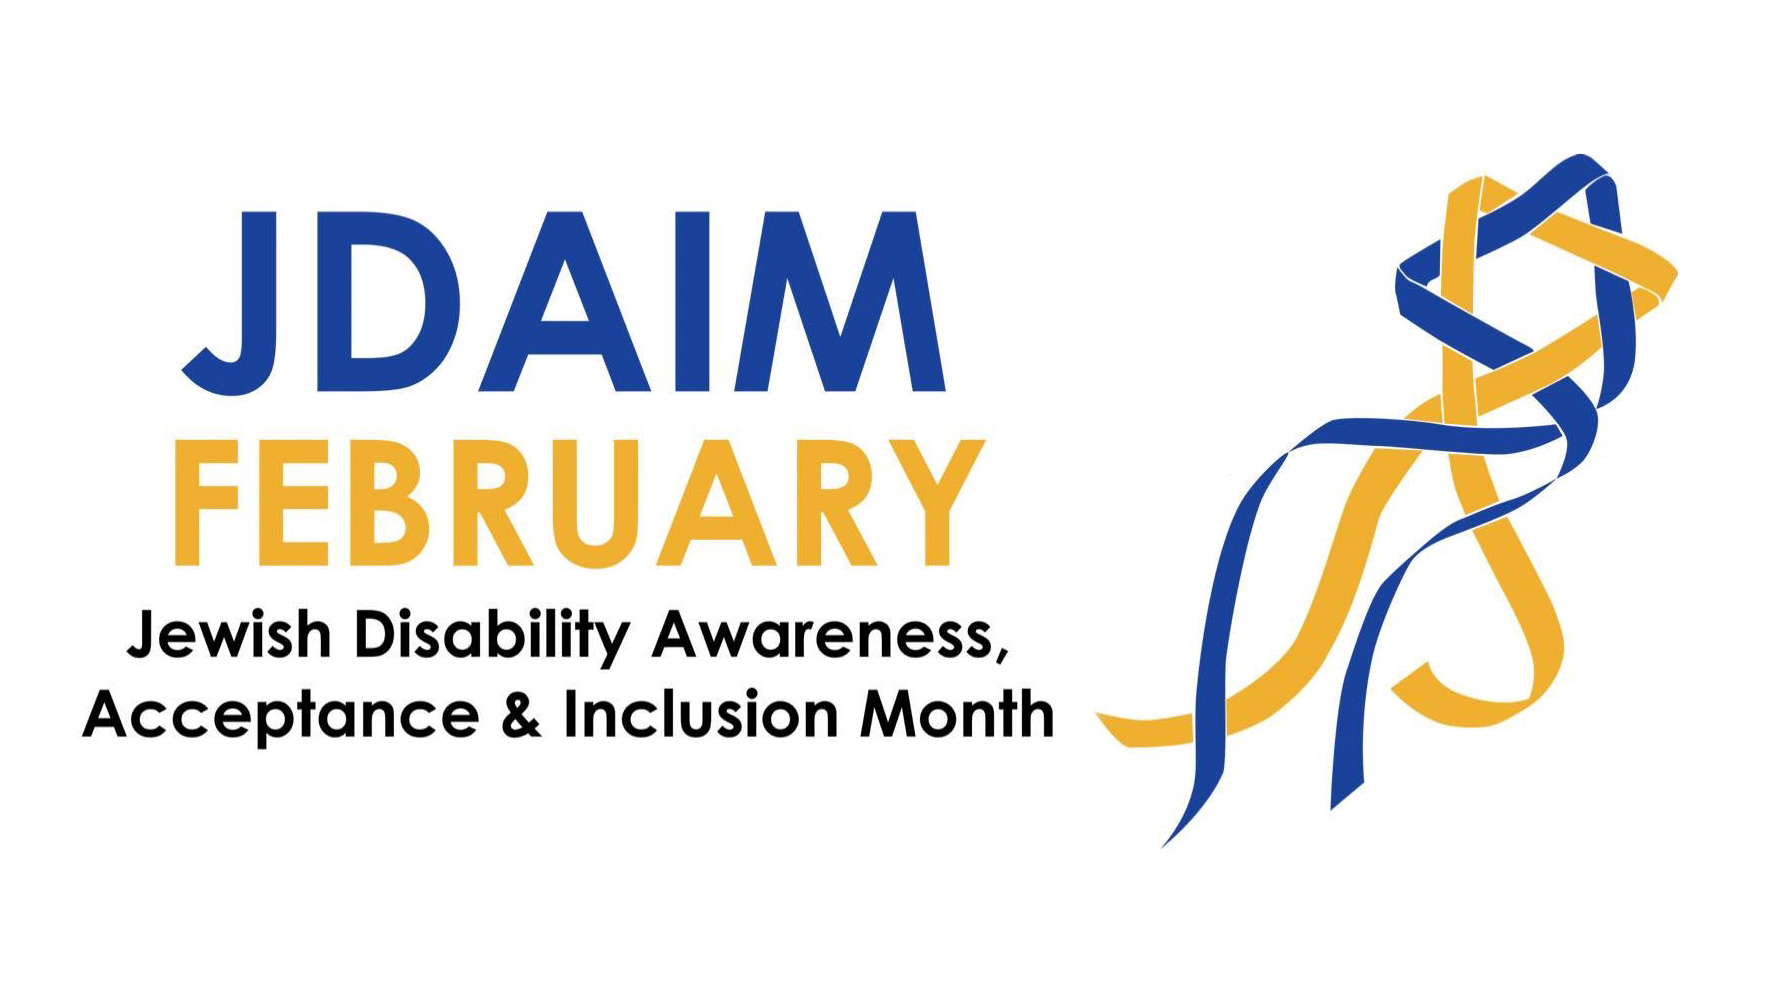 Image: The logo of Jewish Disability Awareness, Acceptance, and Inclusion Month